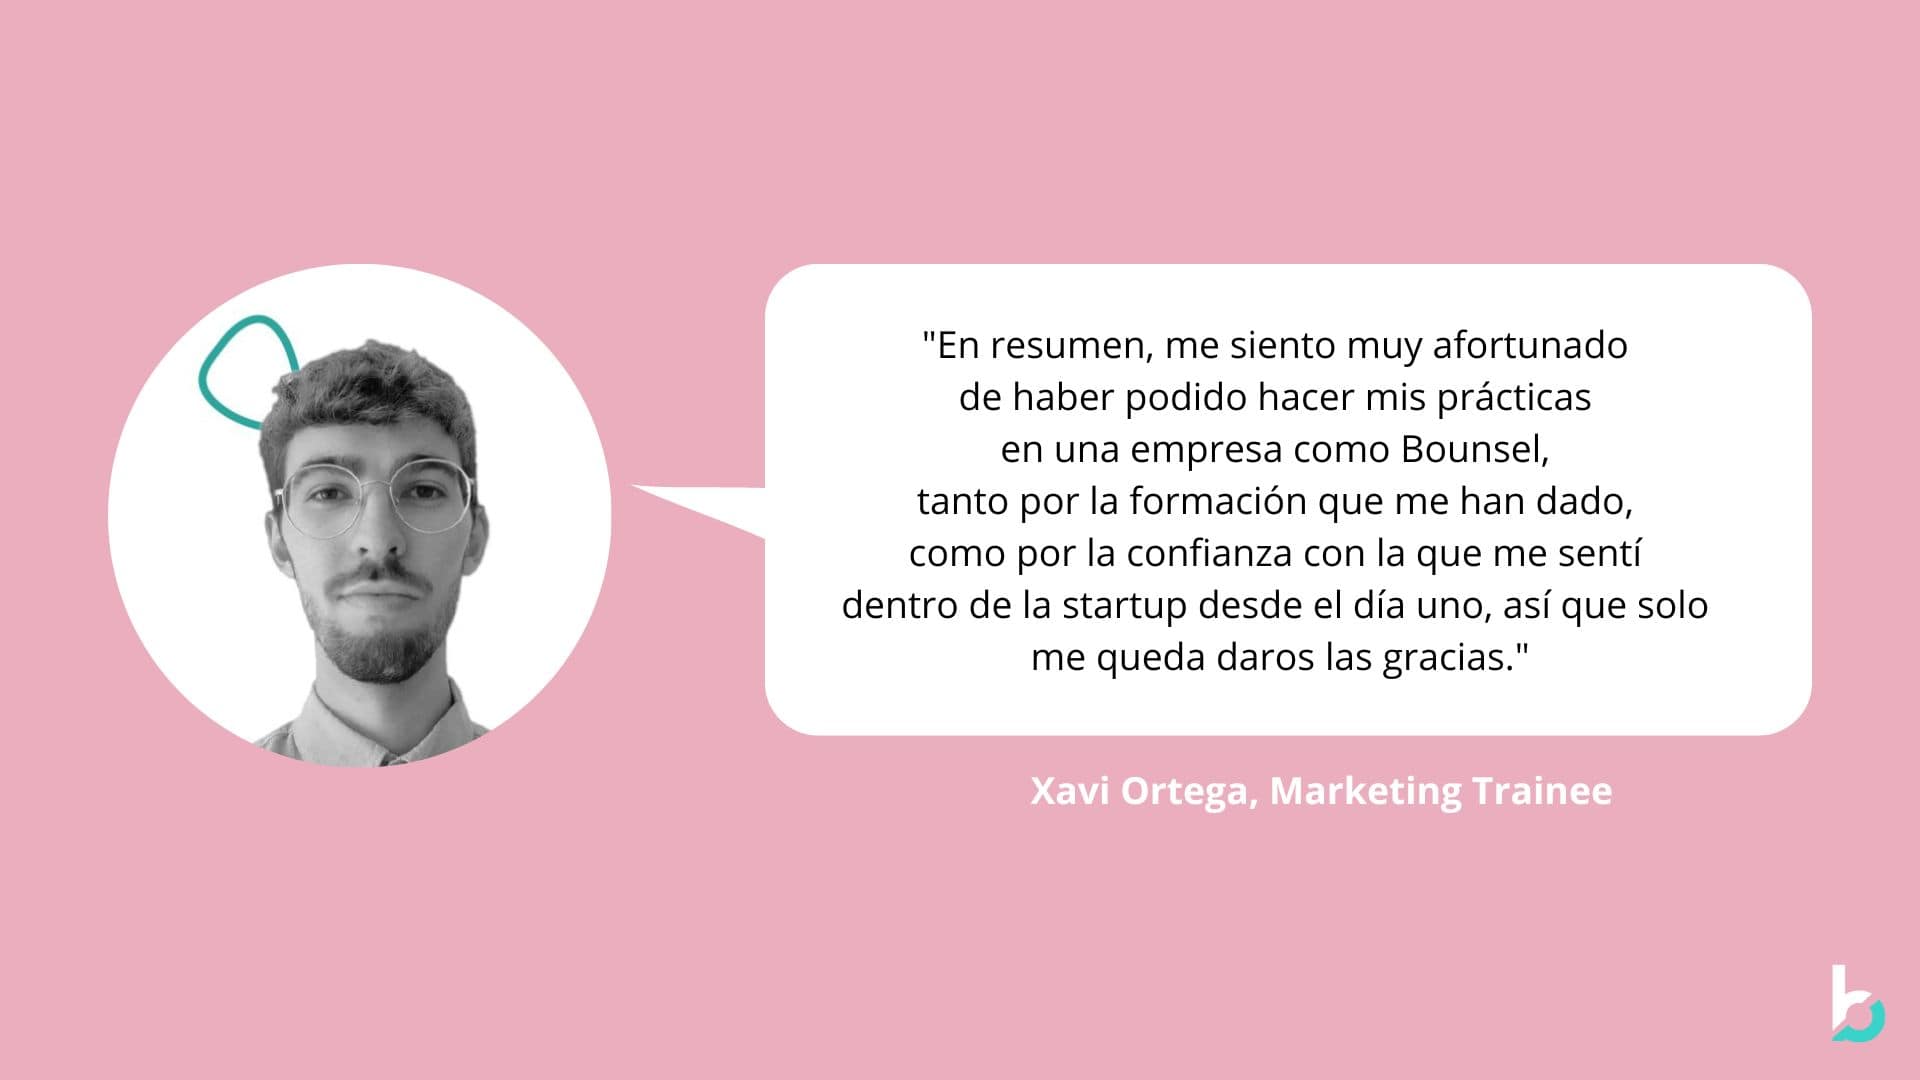 Javi tells us about his experience as Marketing Trainee